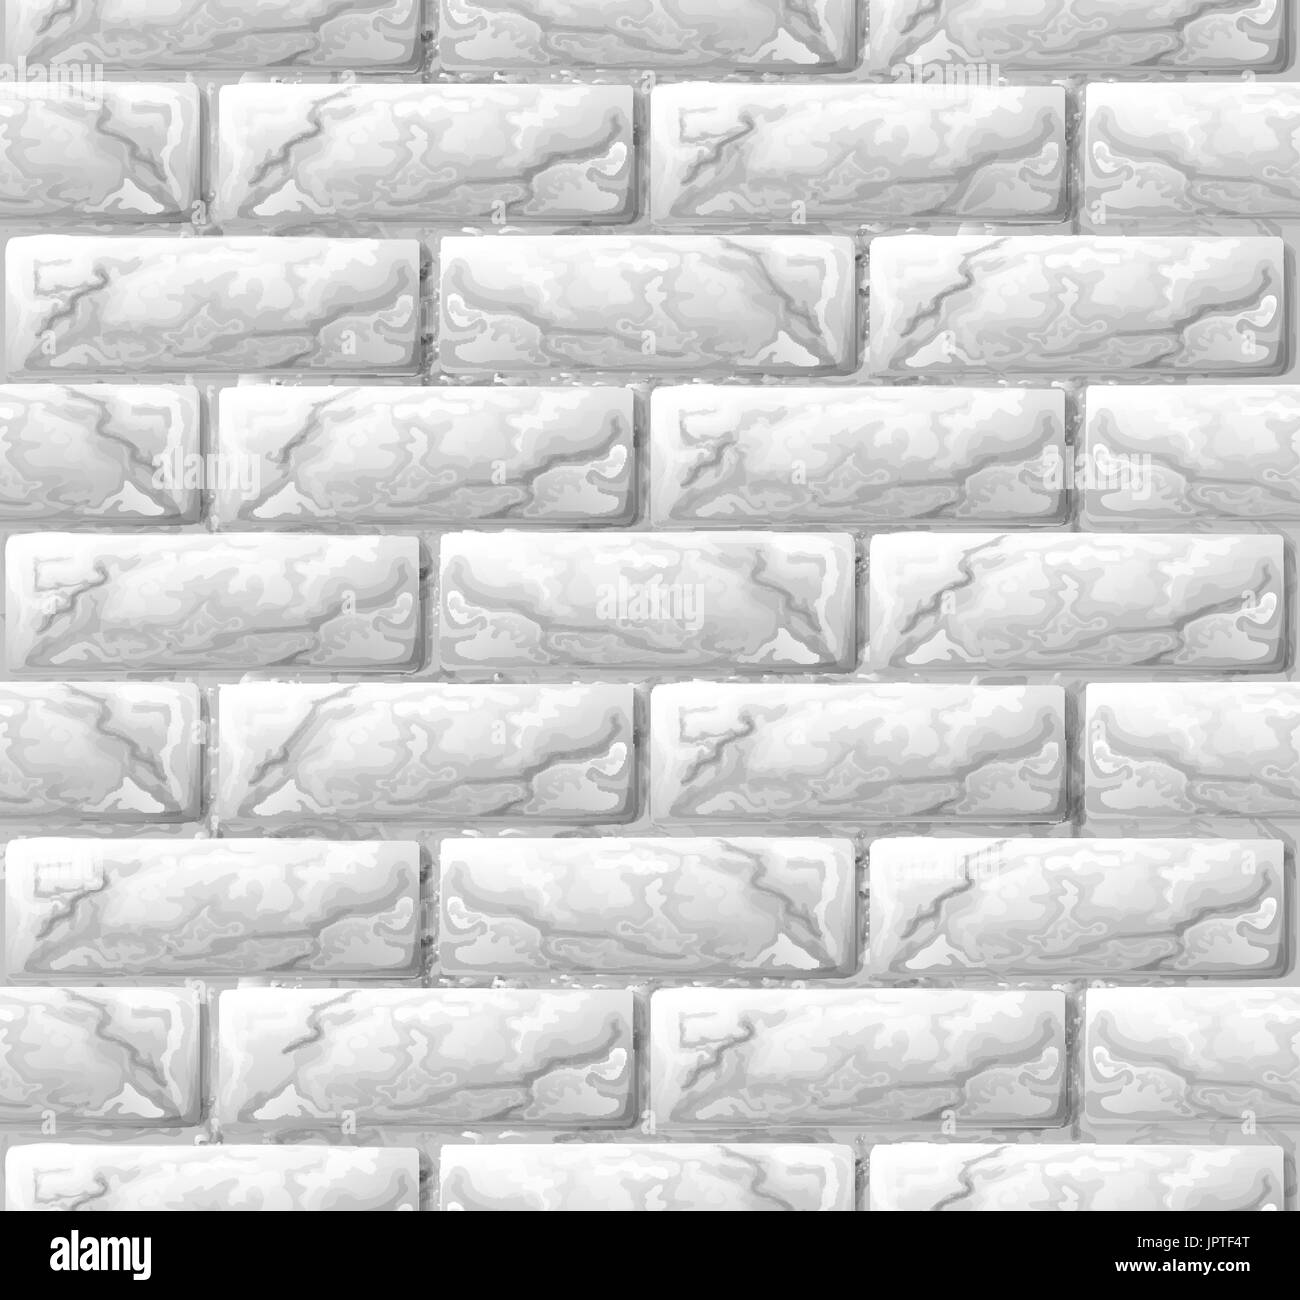 Brick Wall Seamless Texture Background Stock Vector